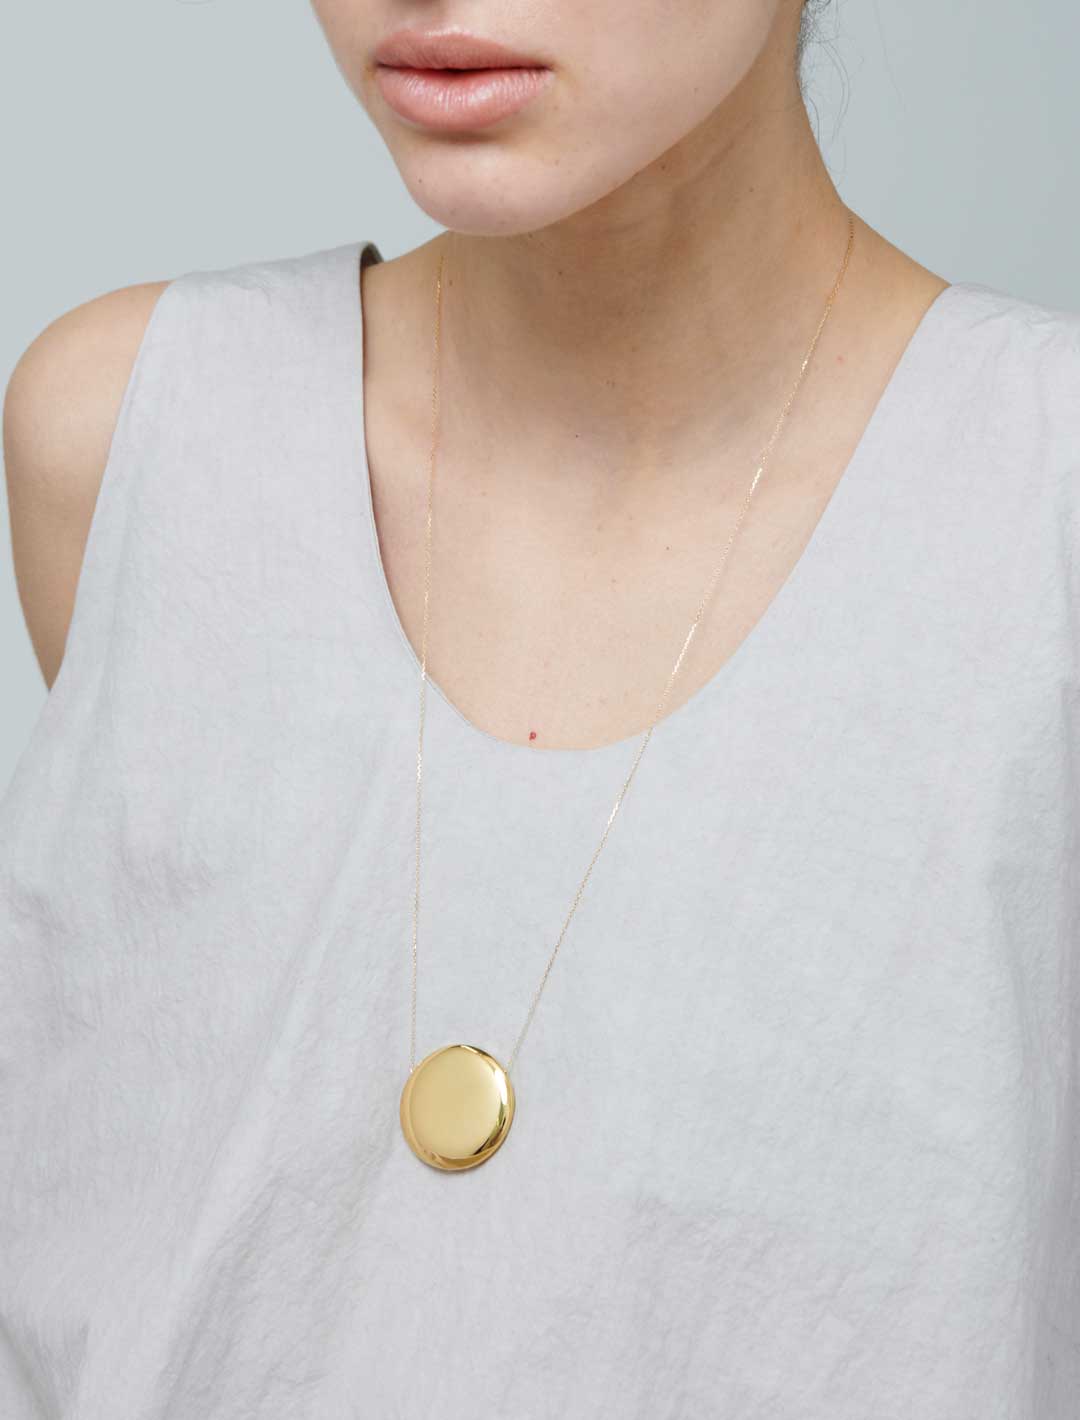 MIRROR Necklace M 65cm - Yellow Gold